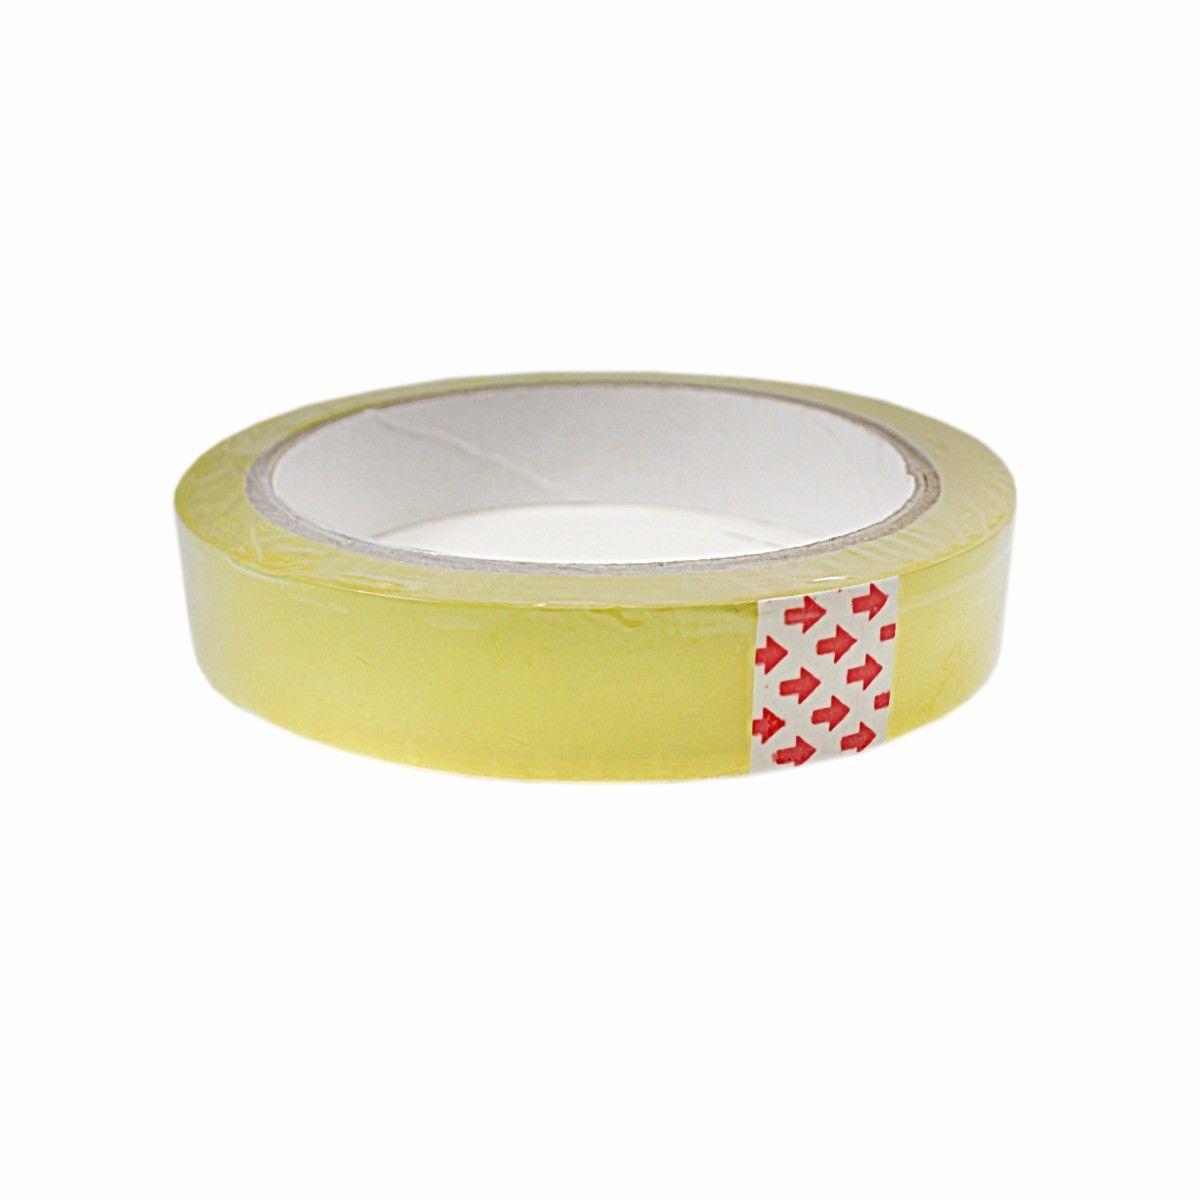 Clear Sellotape Sticky Packing Tape Roll Stationery Adhesive 1.8cm x 60cm 3161 A  (Large Letter Rate)